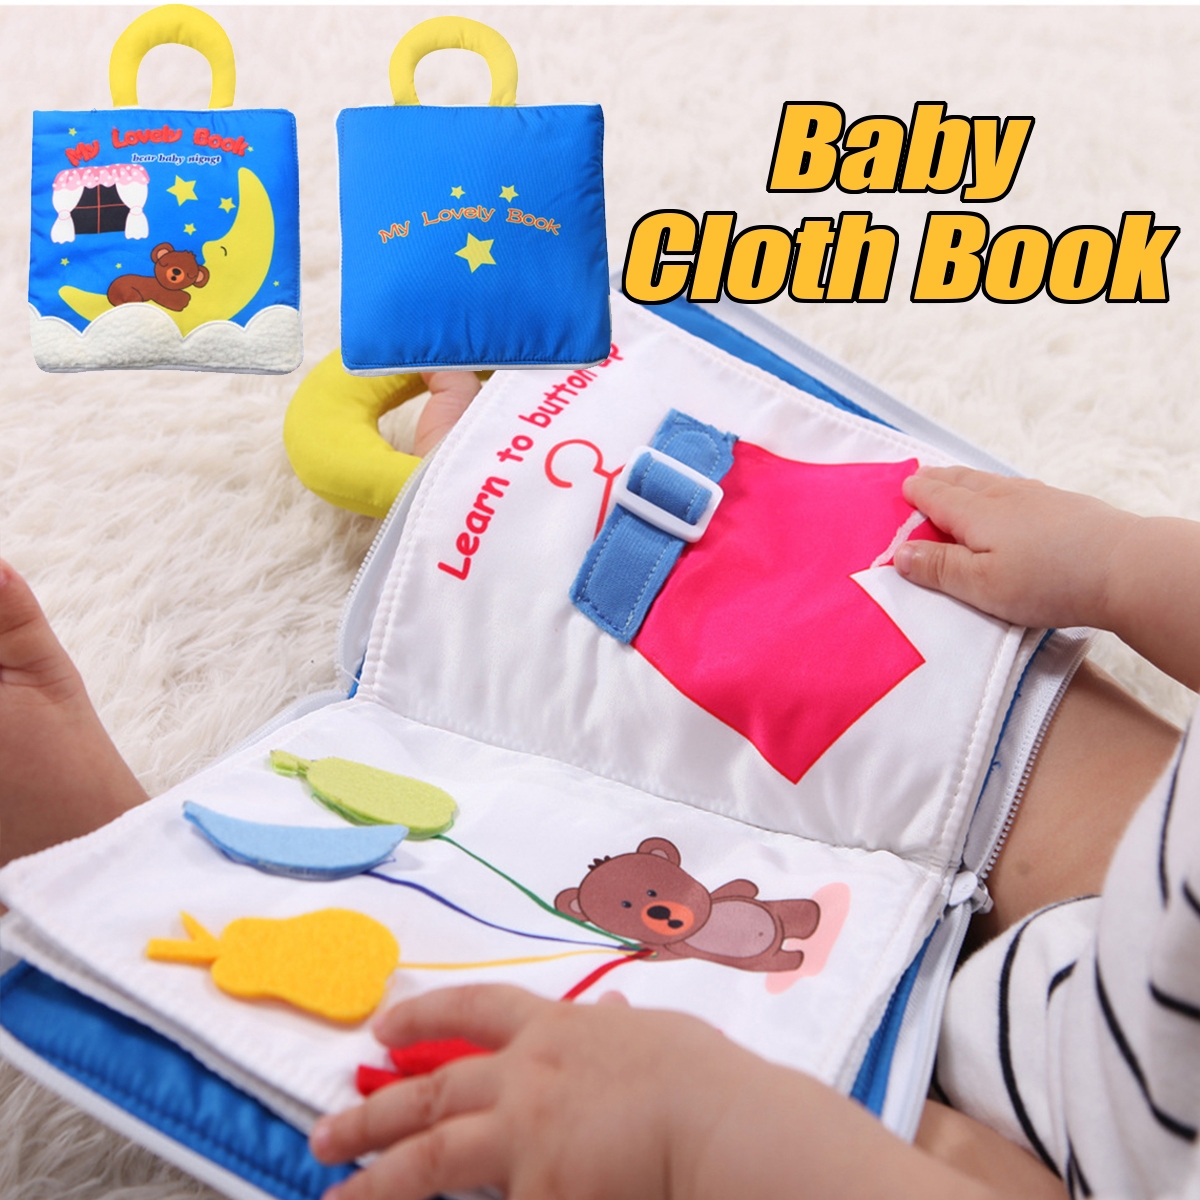 Infant Early Education Soft Cloth Books Baby Learning Activity Practice Hands Book Toys - Photo: 1